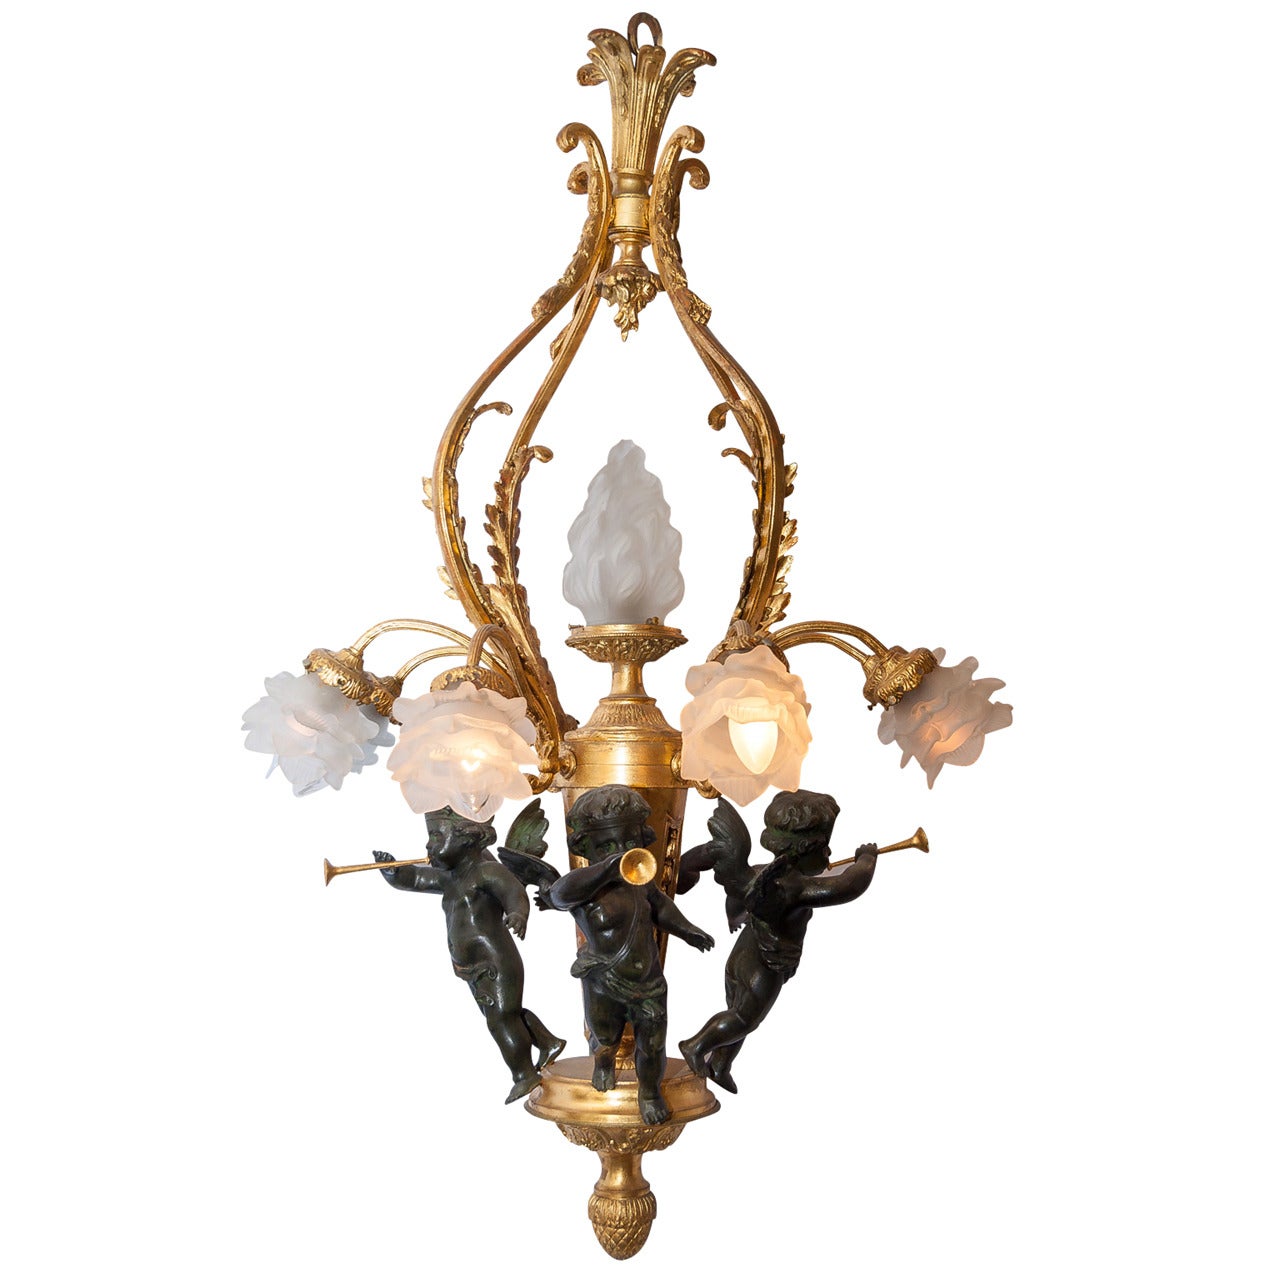 French Patinated and Gilt Bronze Eight-Light Figural Cherub Chandelier